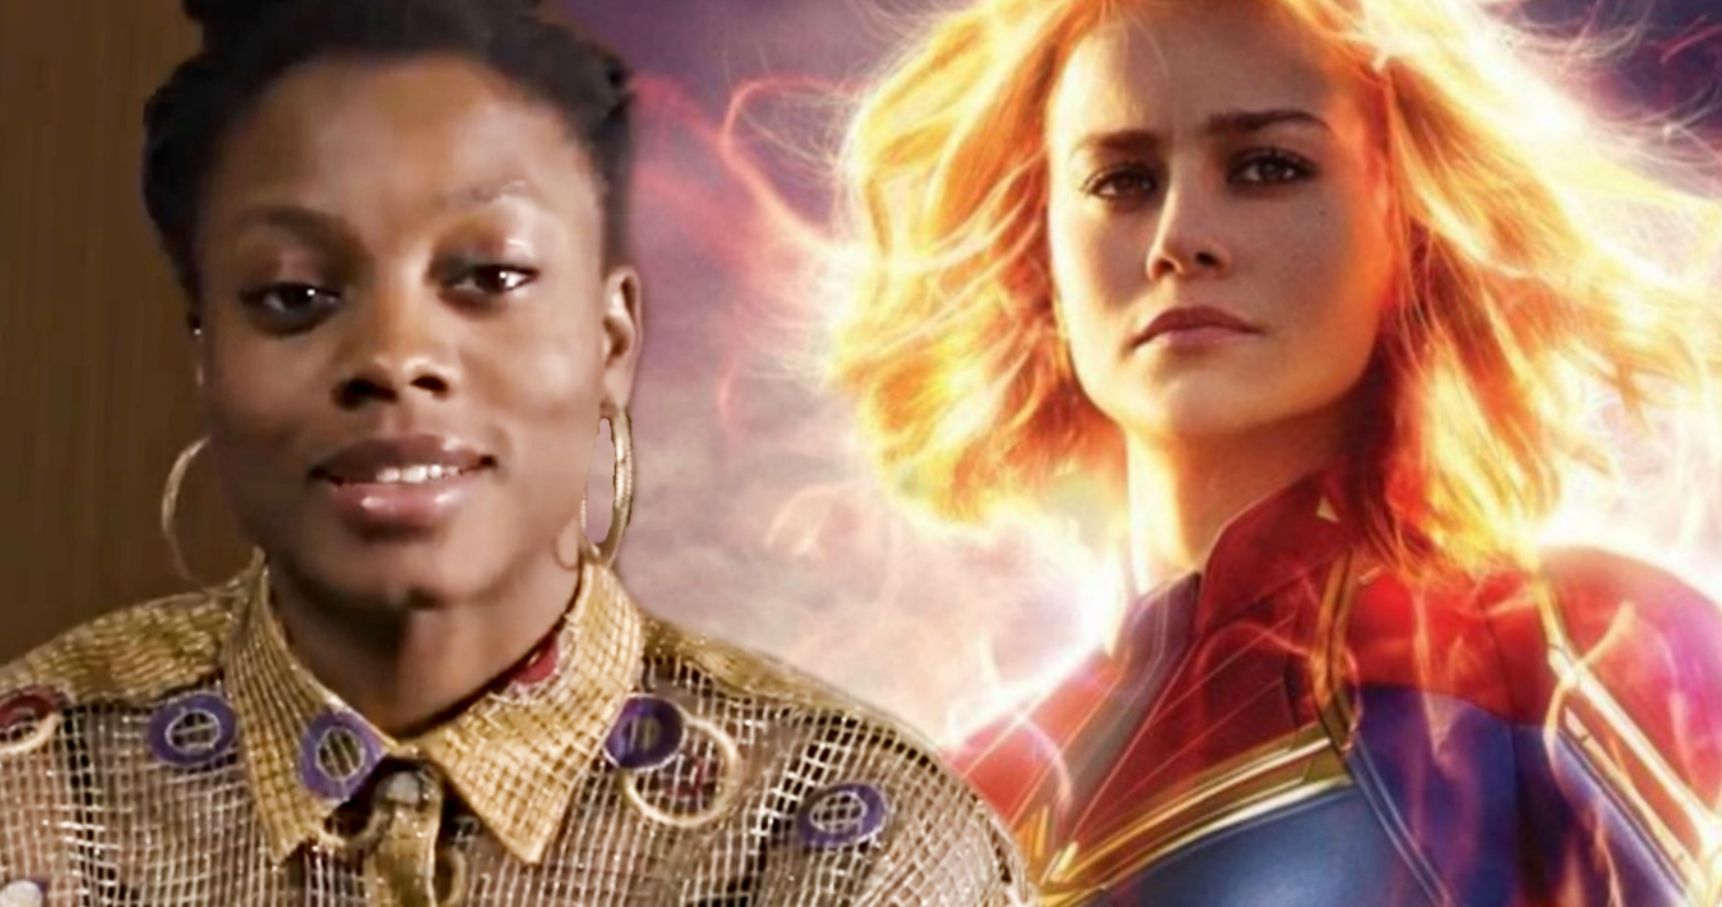 Captain Marvel 2 Director Nia DaCosta Welcomed Into the MCU Family by Original Director